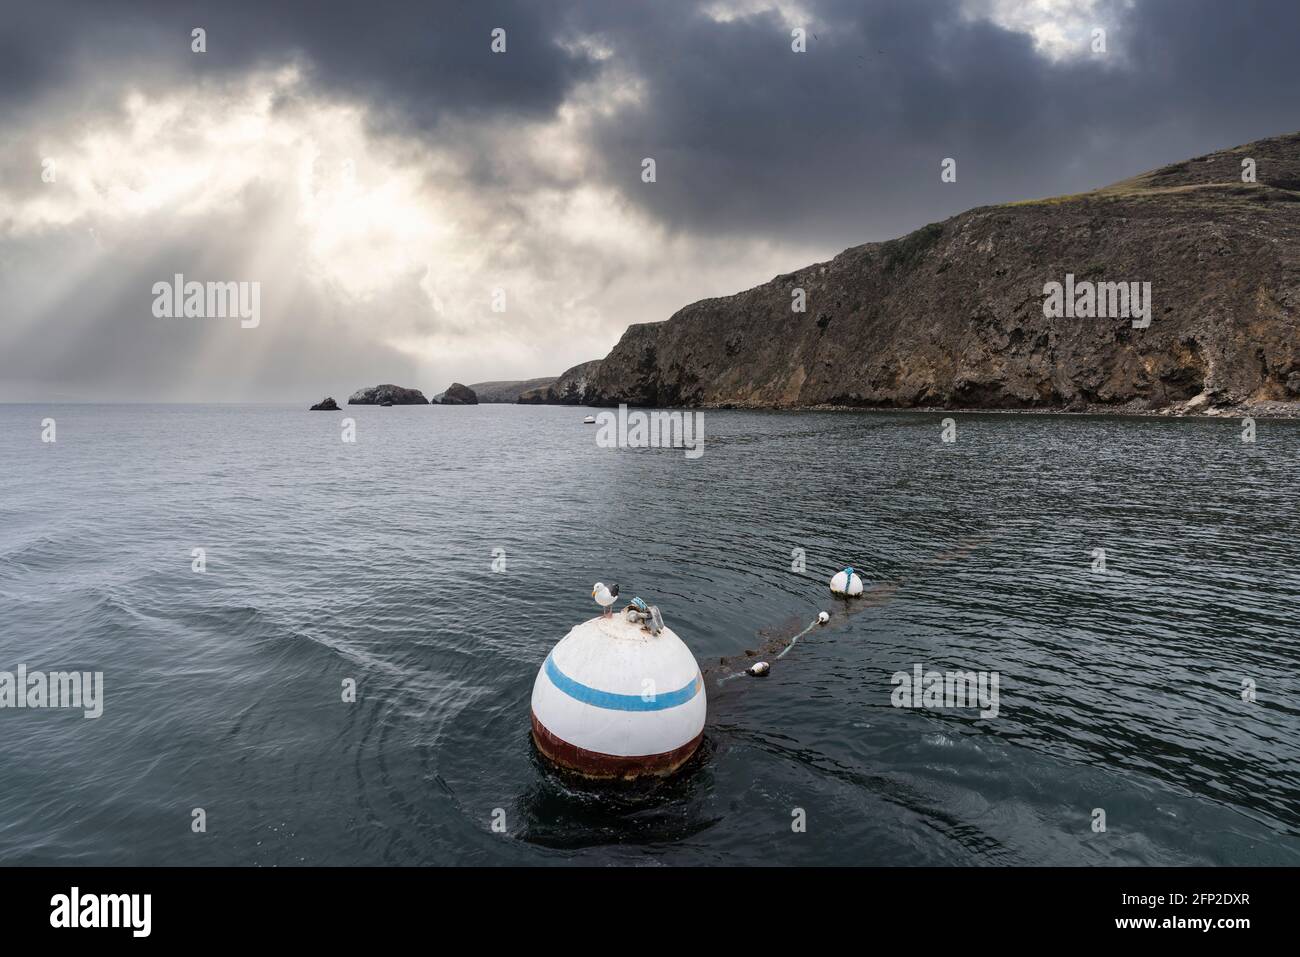 Buoy and Seagull floating at Santa Cruz Island Scorpion Anchorage in Channel Islands National Park near Los Angeles and Ventura, California, USA. Stock Photo